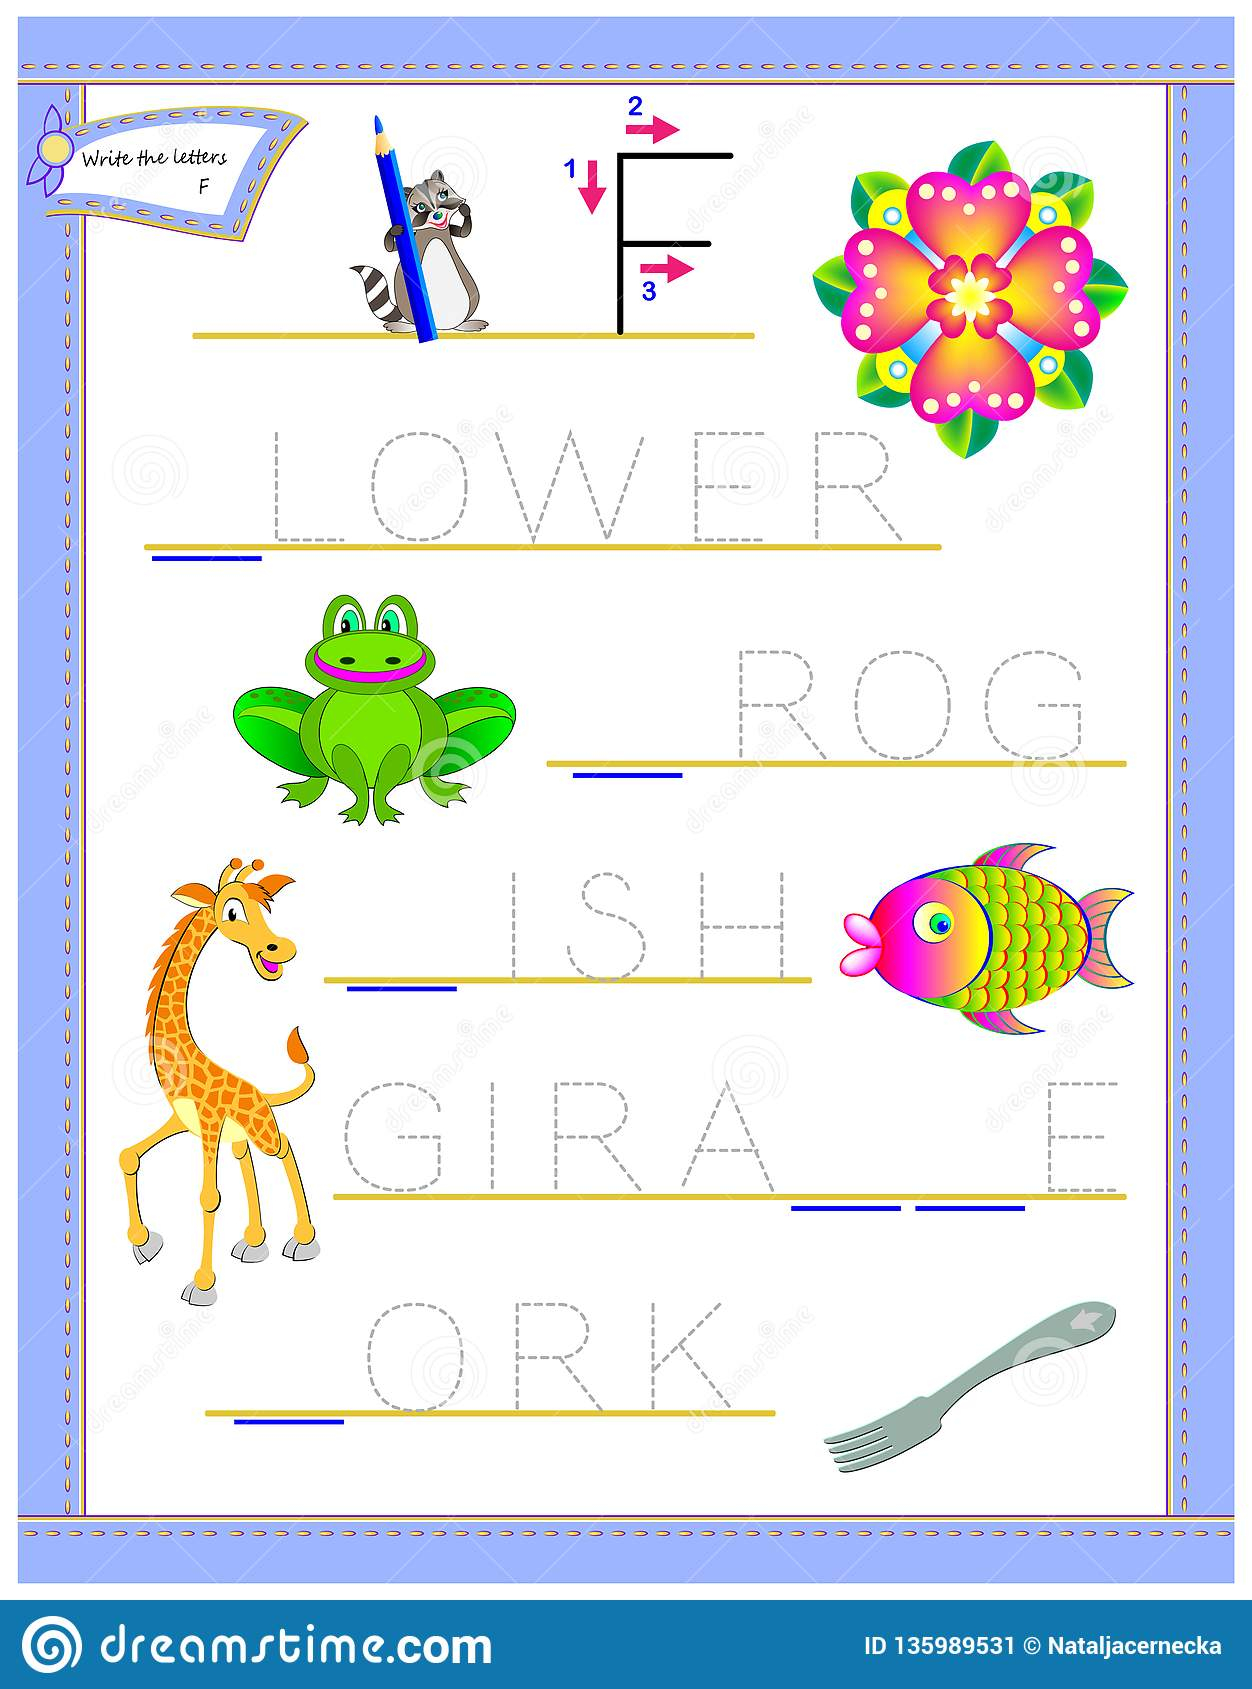 Tracing Letter F For Study English Alphabet. Printable